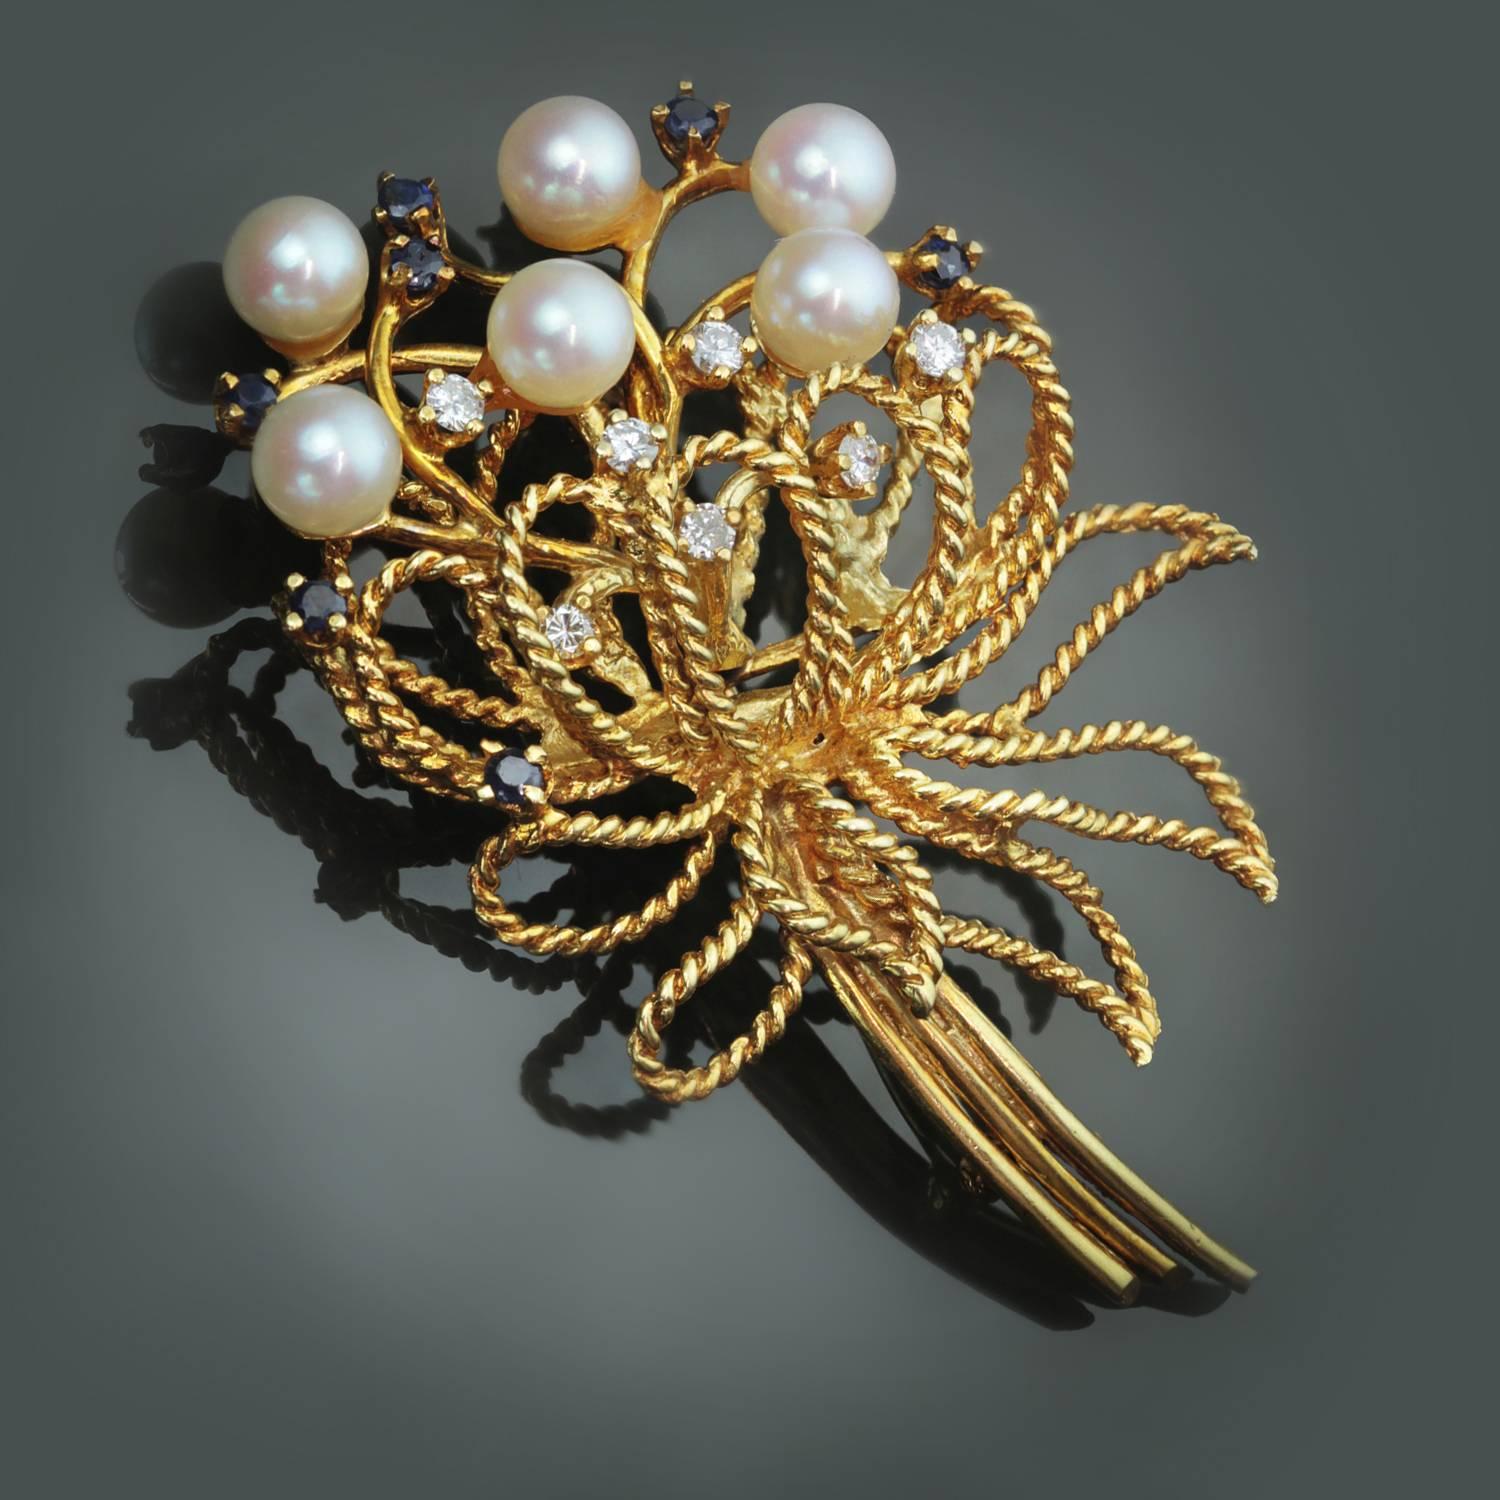 This elegant circa 1963 brooch is made in twisted 18k yellow gold and prong-set with 7 sparkling diamonds, 7 faceted blue sapphires, and 6 6.0mm cultured pearls. Signed Karbra. . 